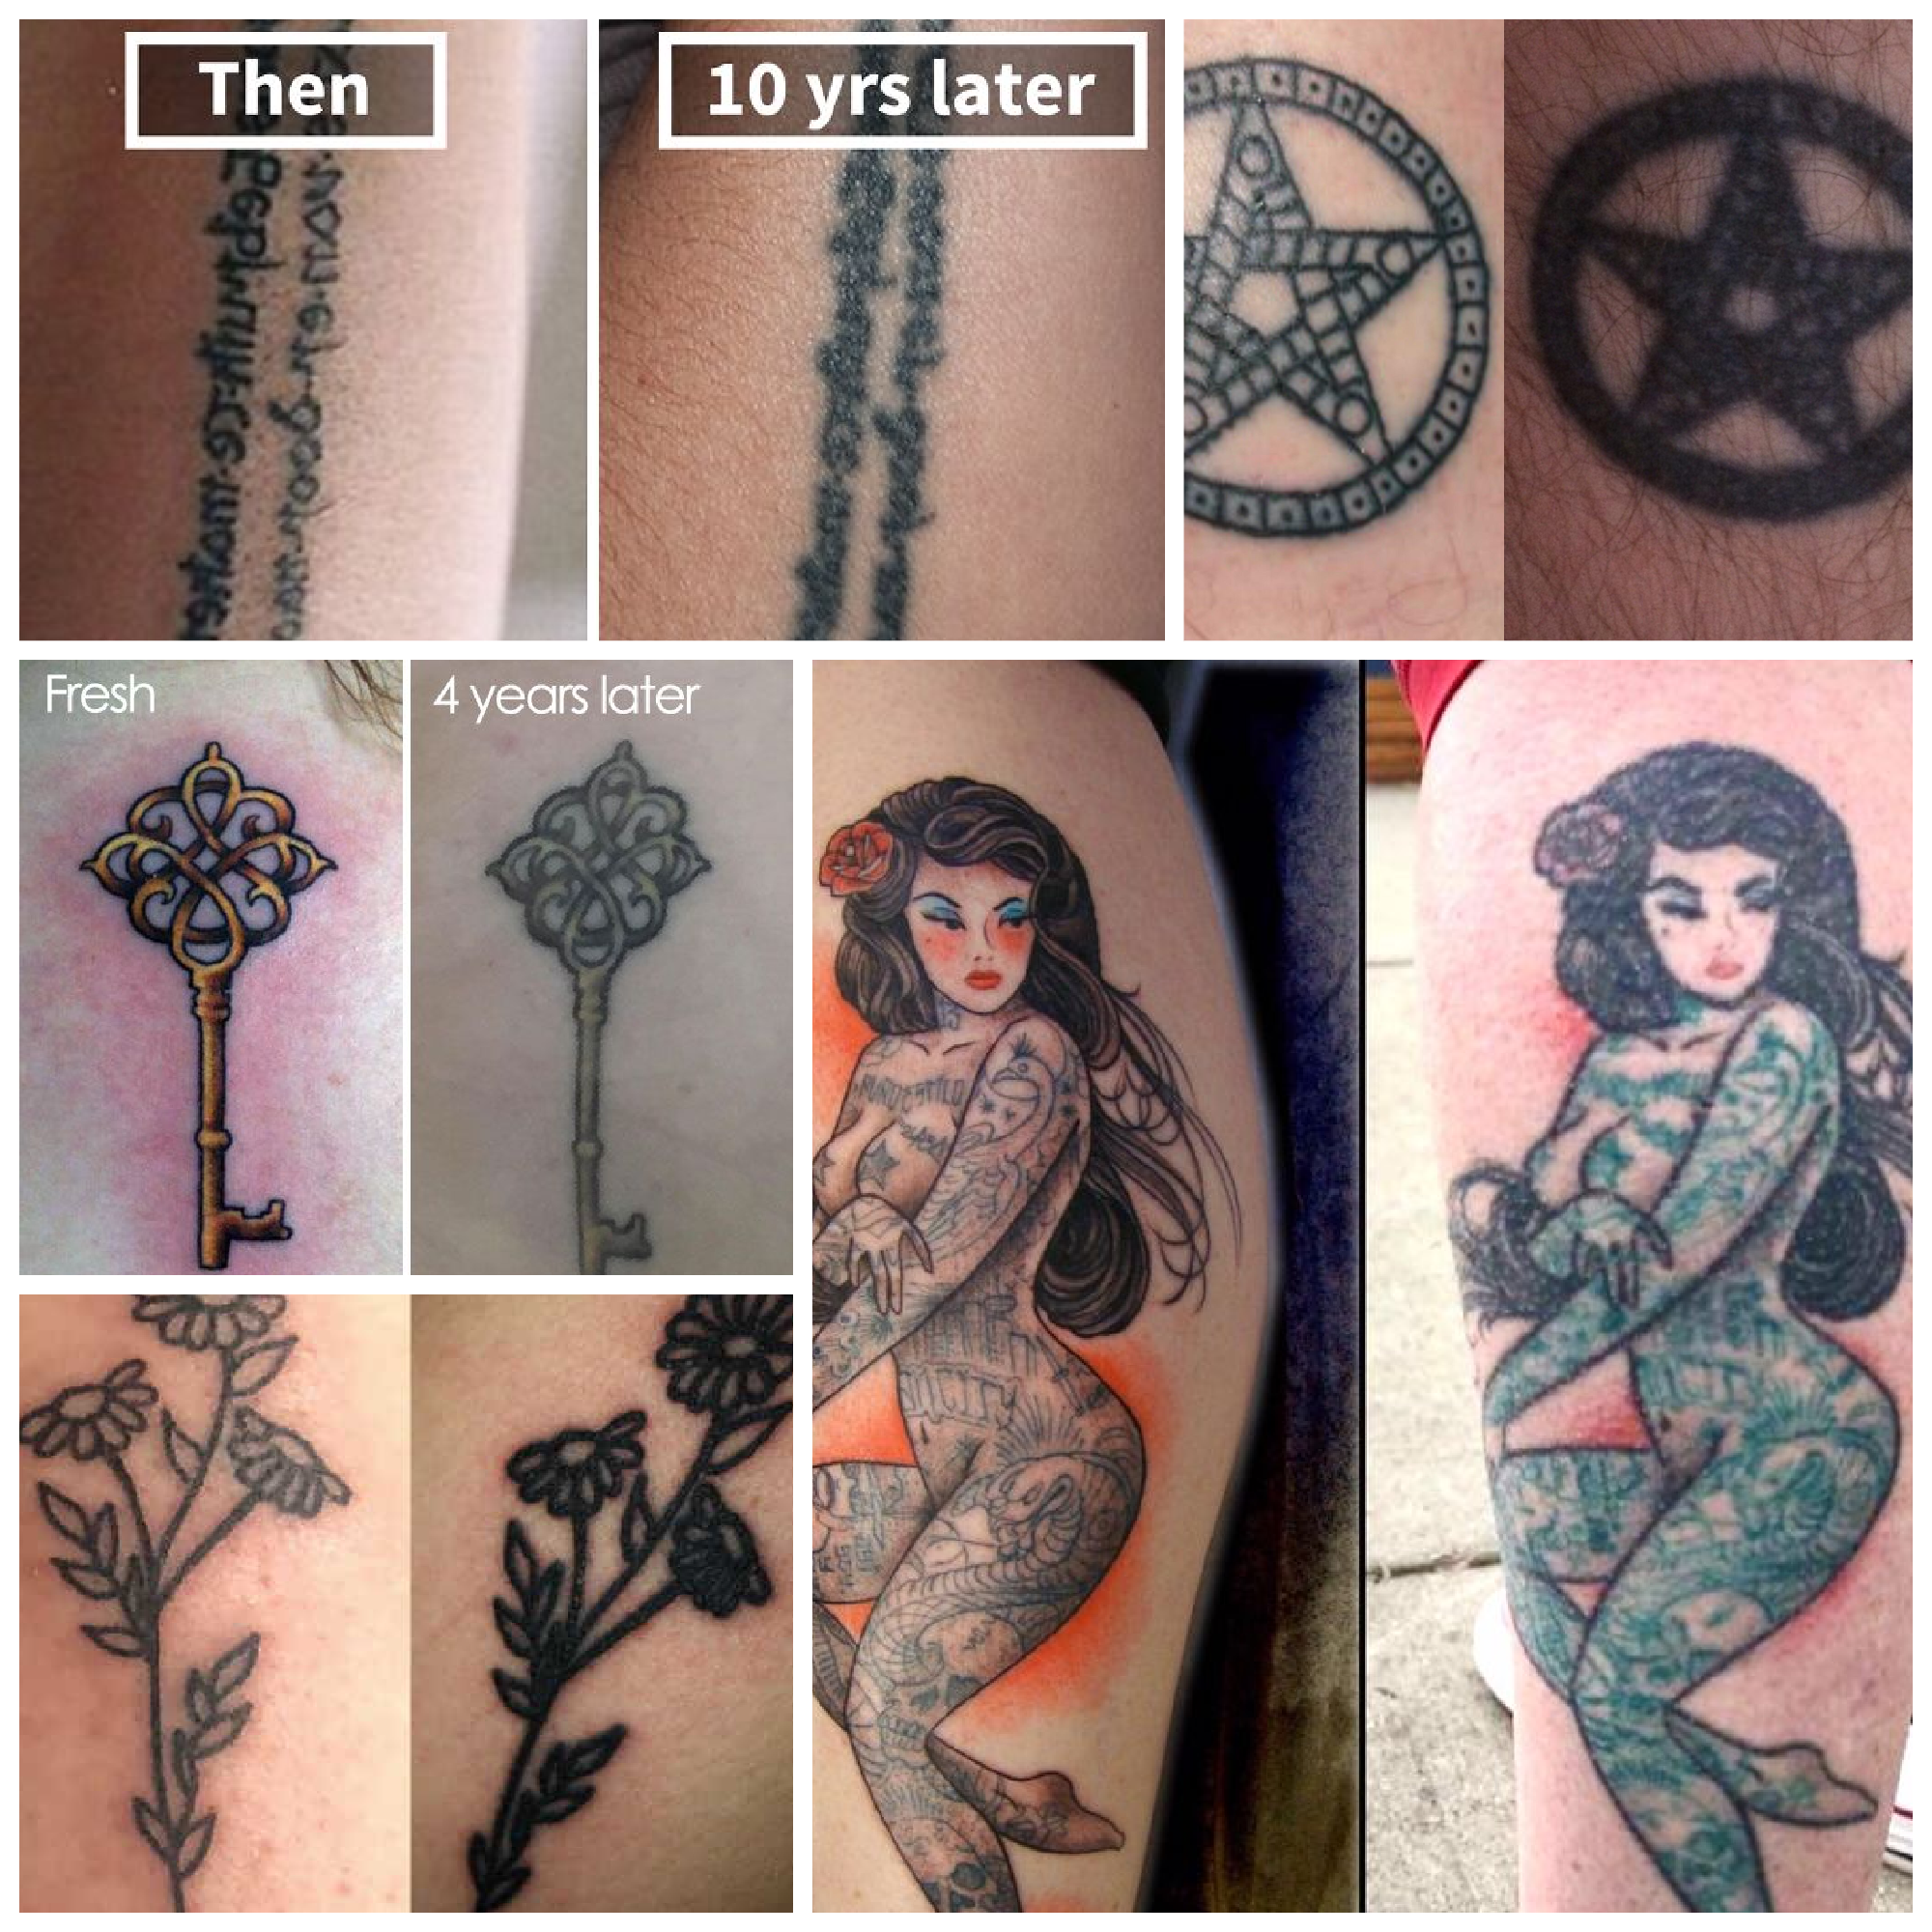 Why You Should Get a Tattoo at Age 42 | by Helen Spencer | Medium